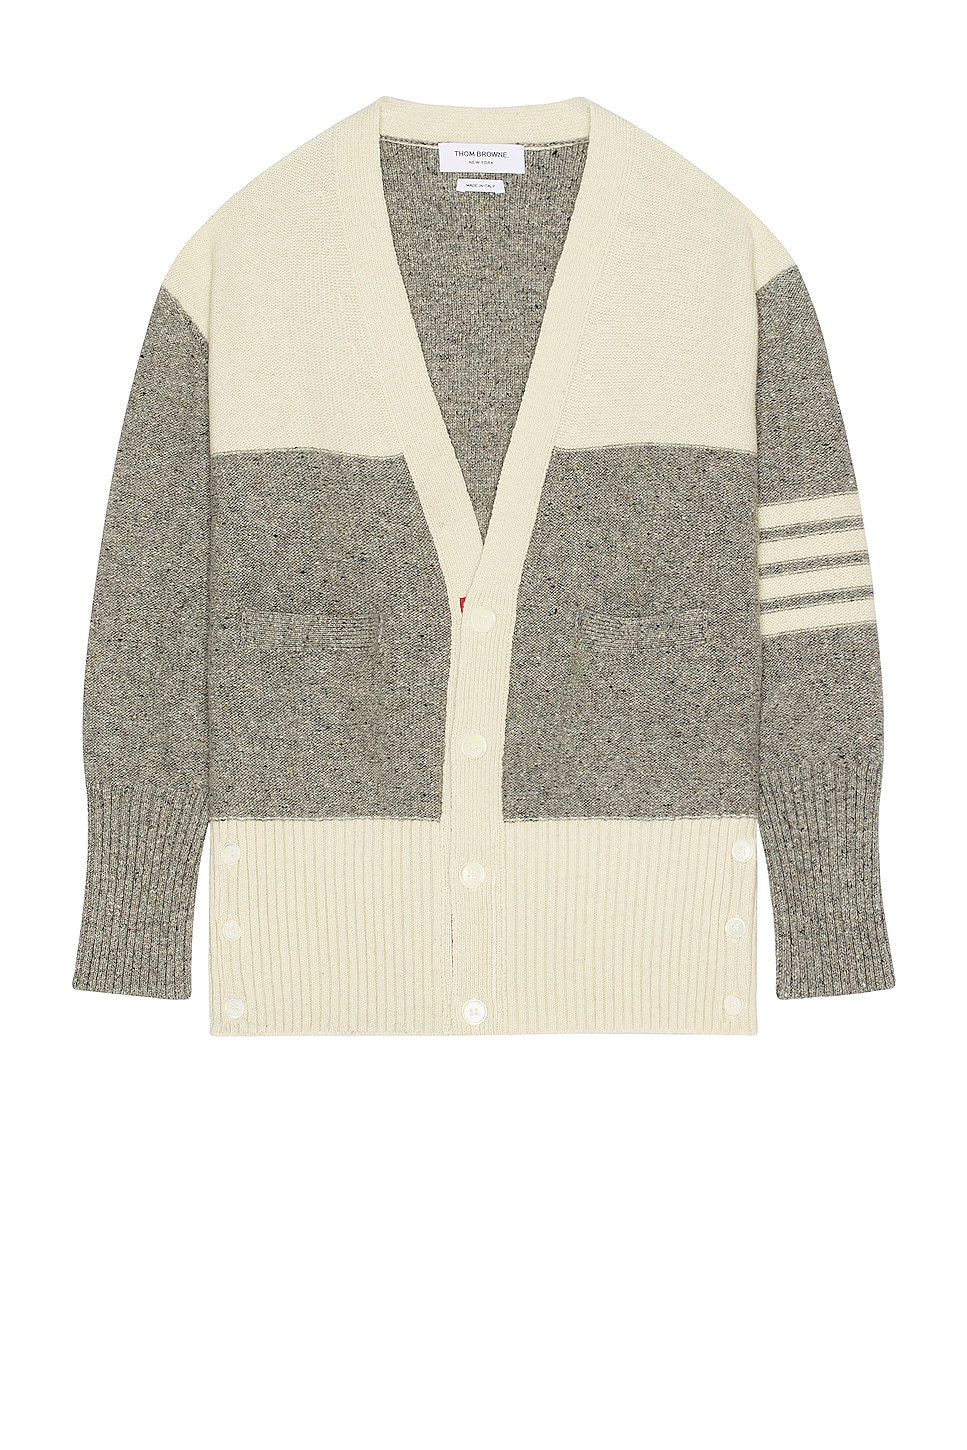 Image 1 of Thom Browne Reversed Jersey Oversized Cardigan in Light Grey